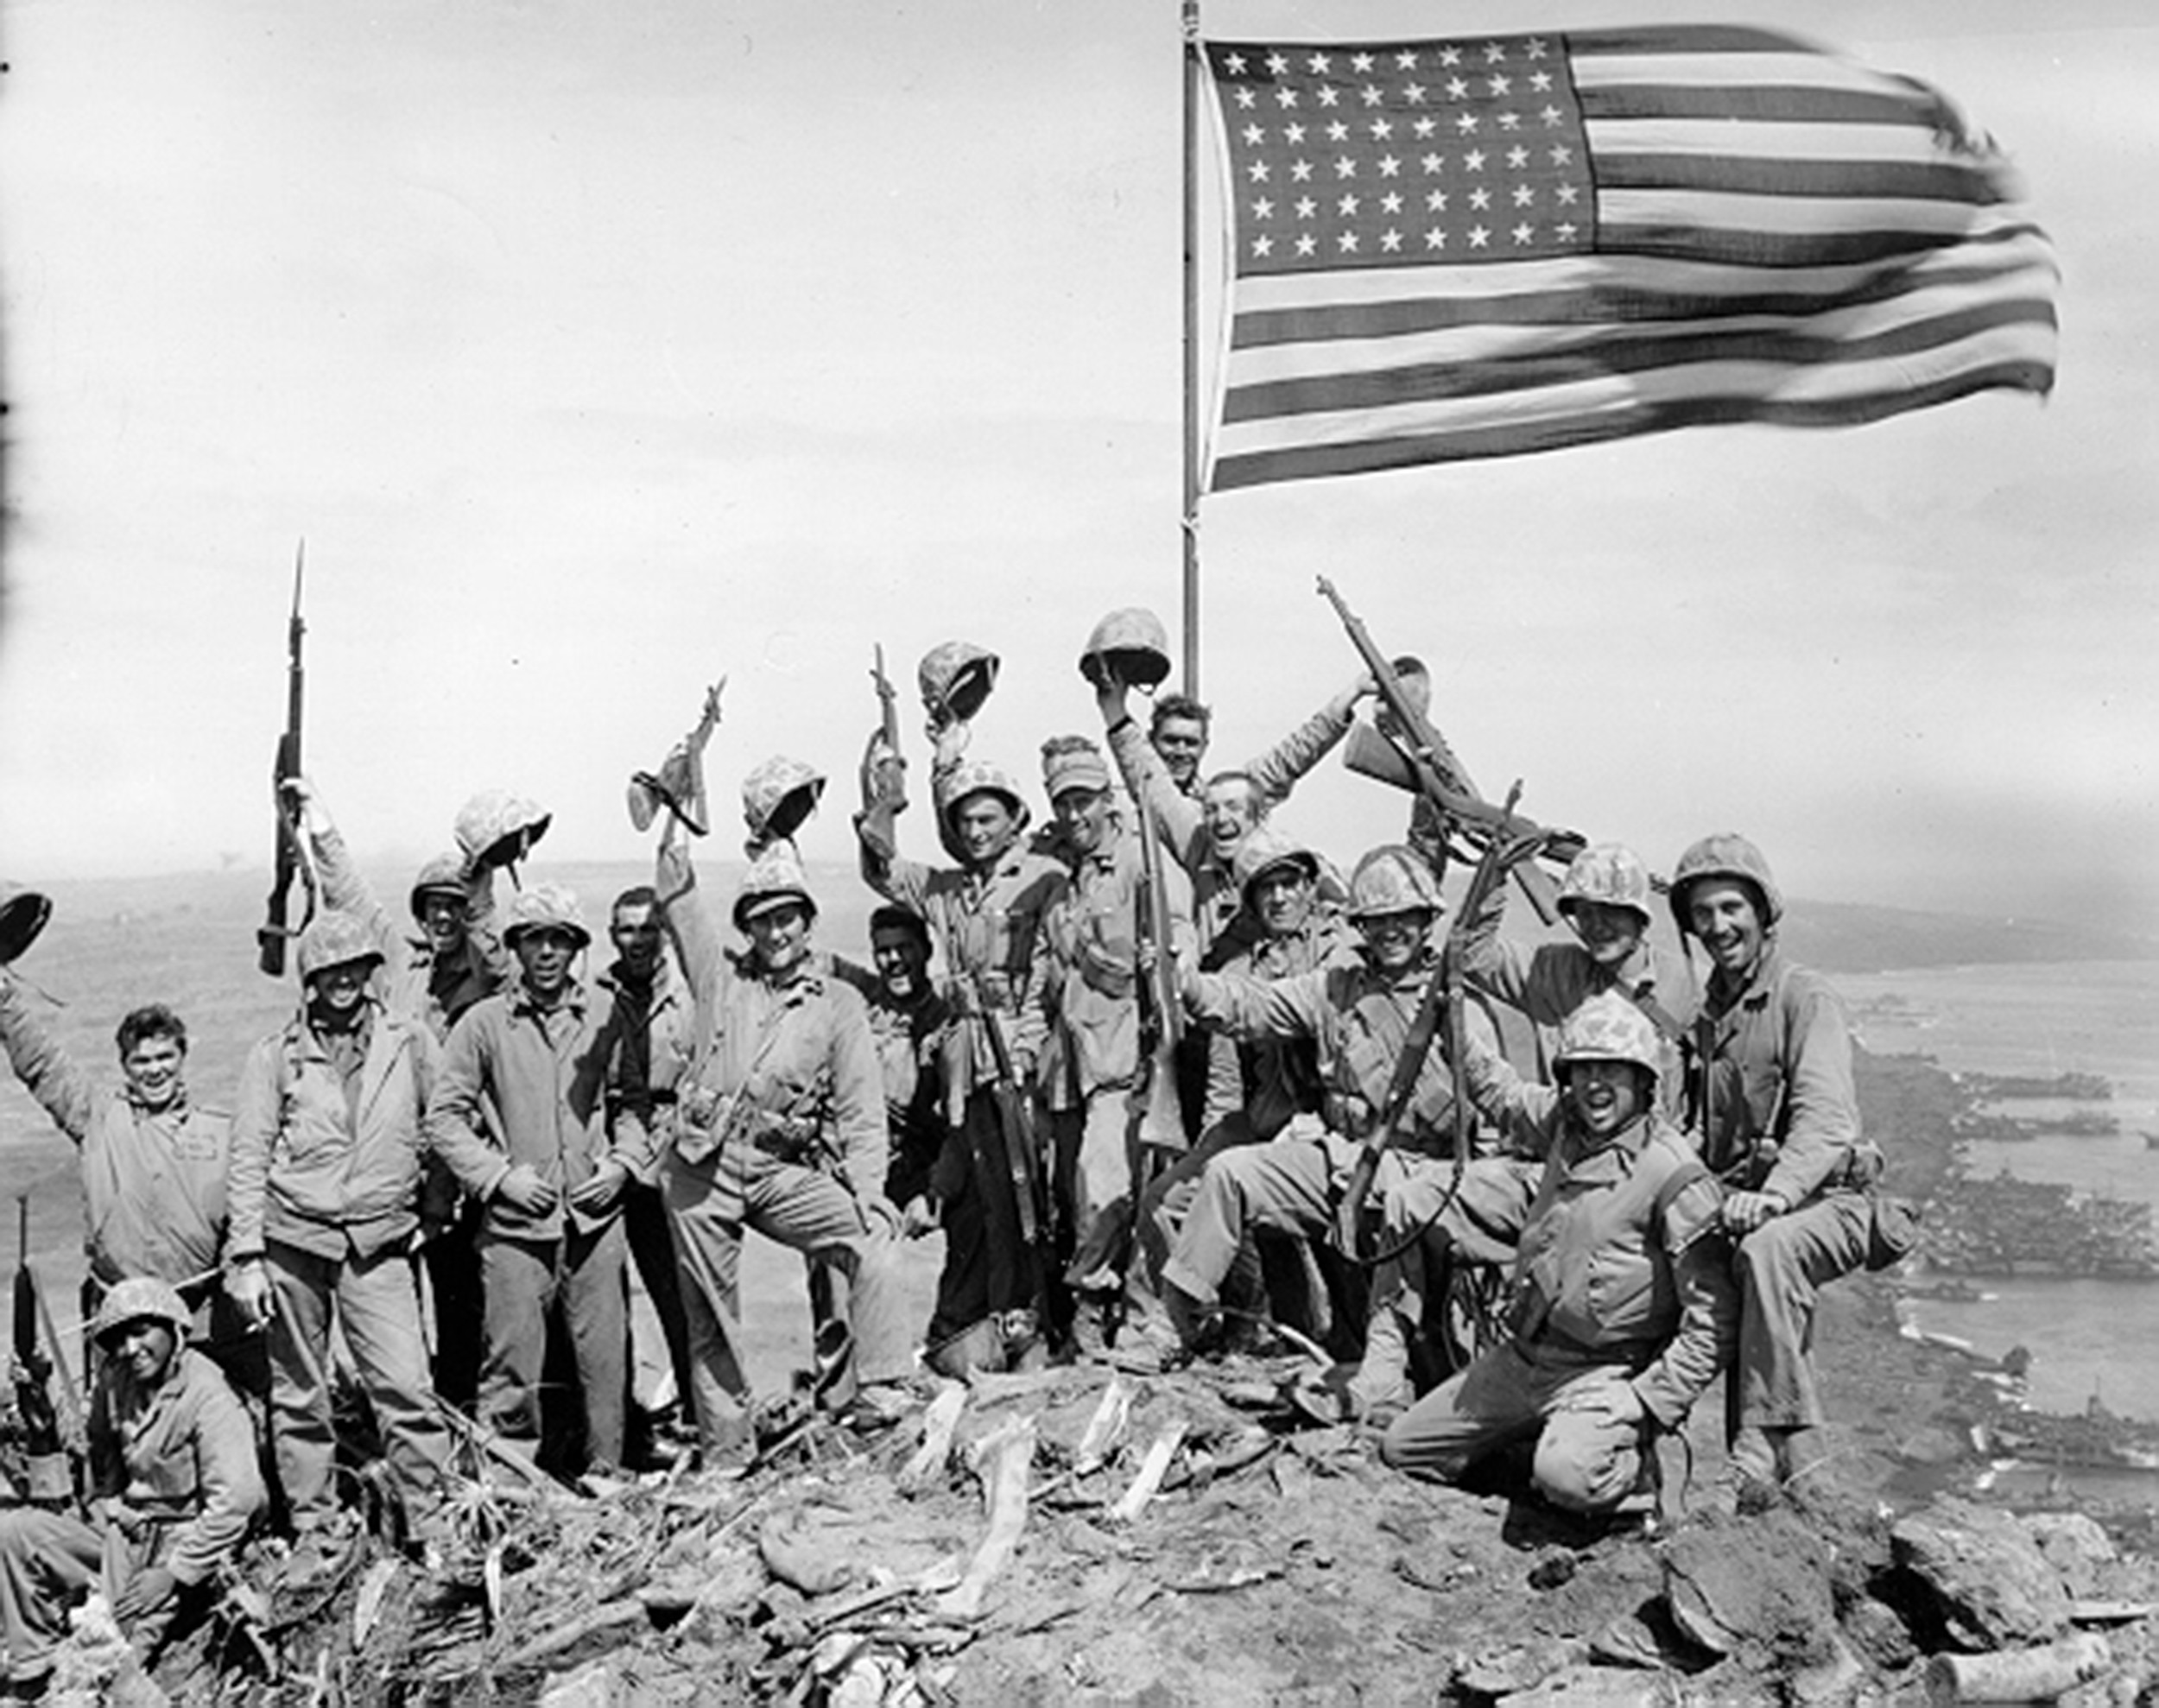 2500x1978 Star-Spangled Mystery: What Became of Lost Iwo Jima Flag-Raising Photos? -  NBC News